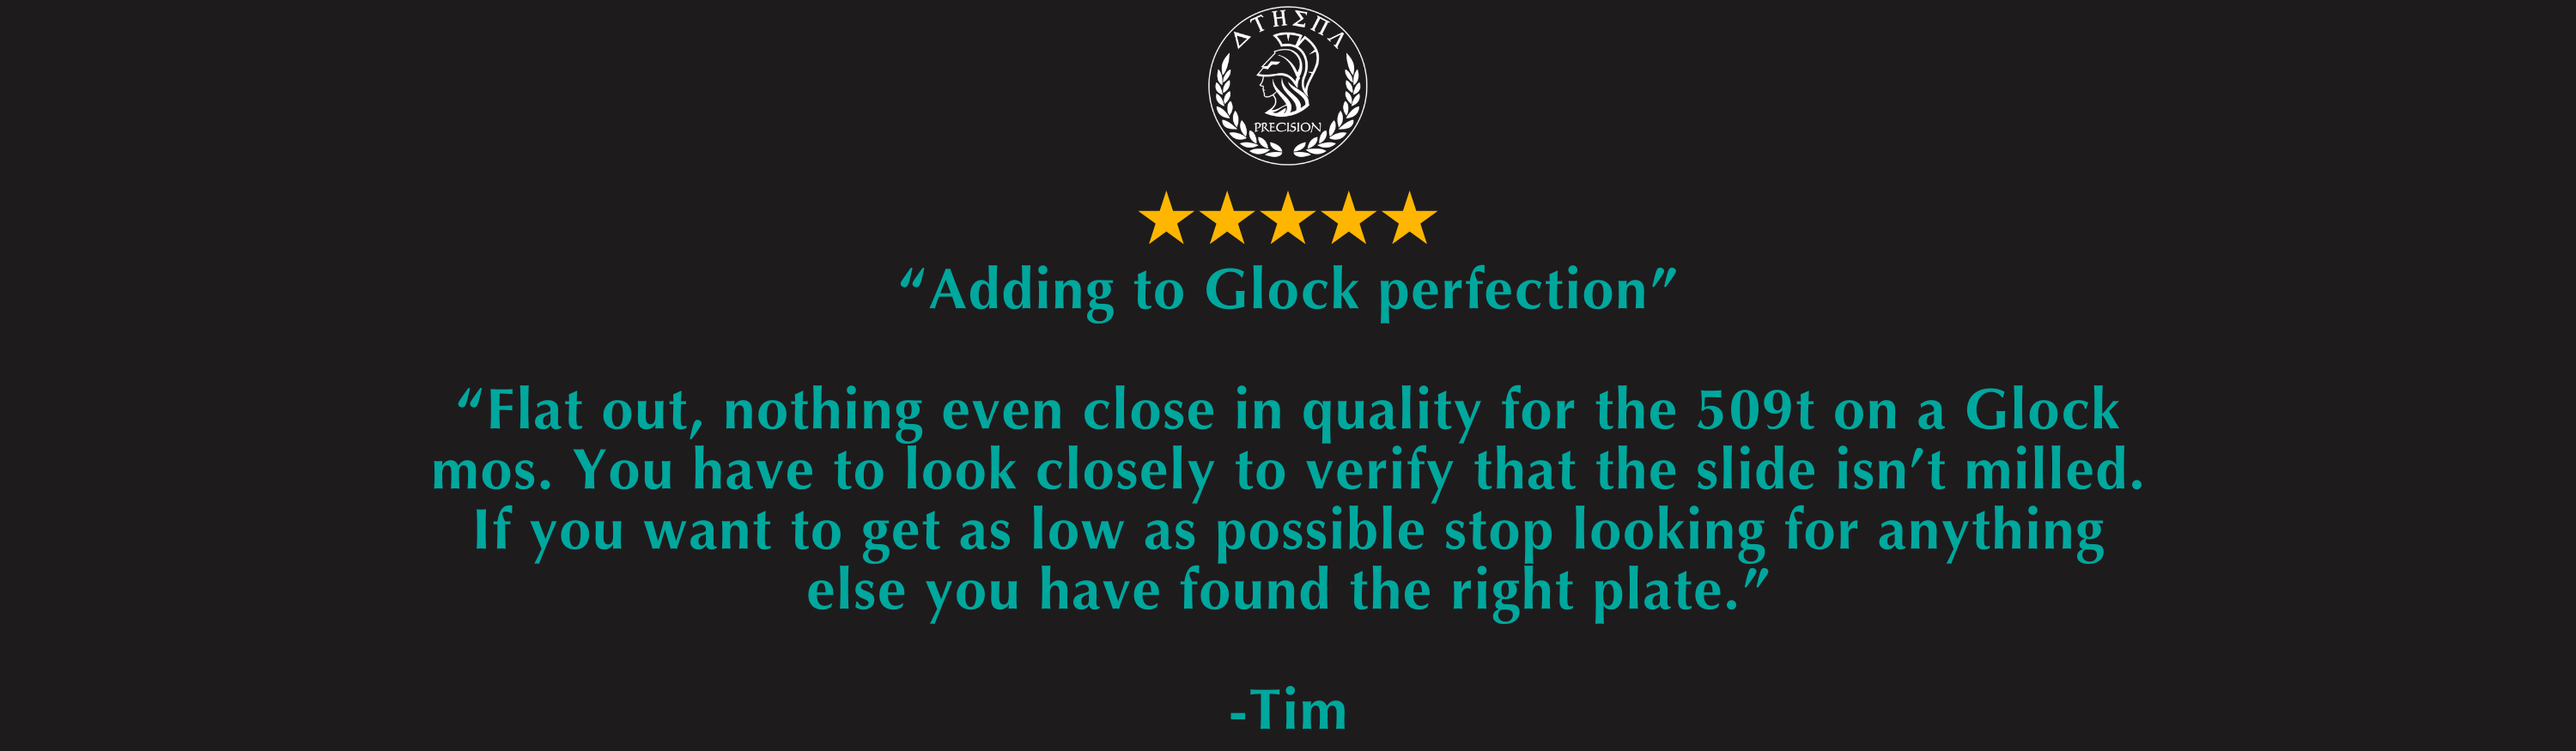 Tim Review